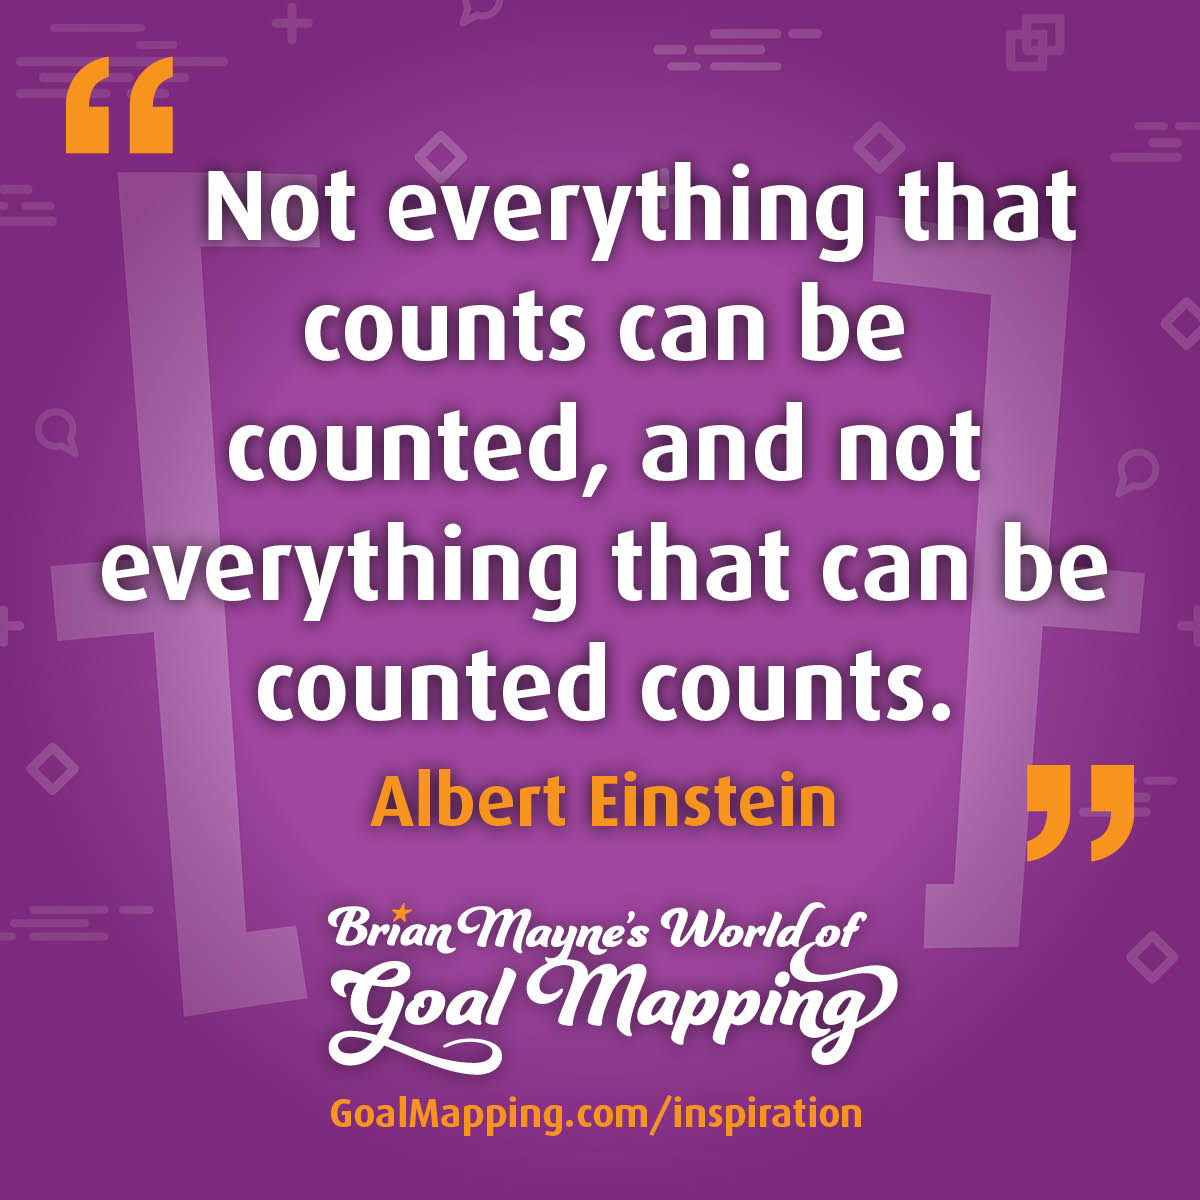 "Not everything that counts can be counted, and not everything that can be counted counts." Albert Einstein